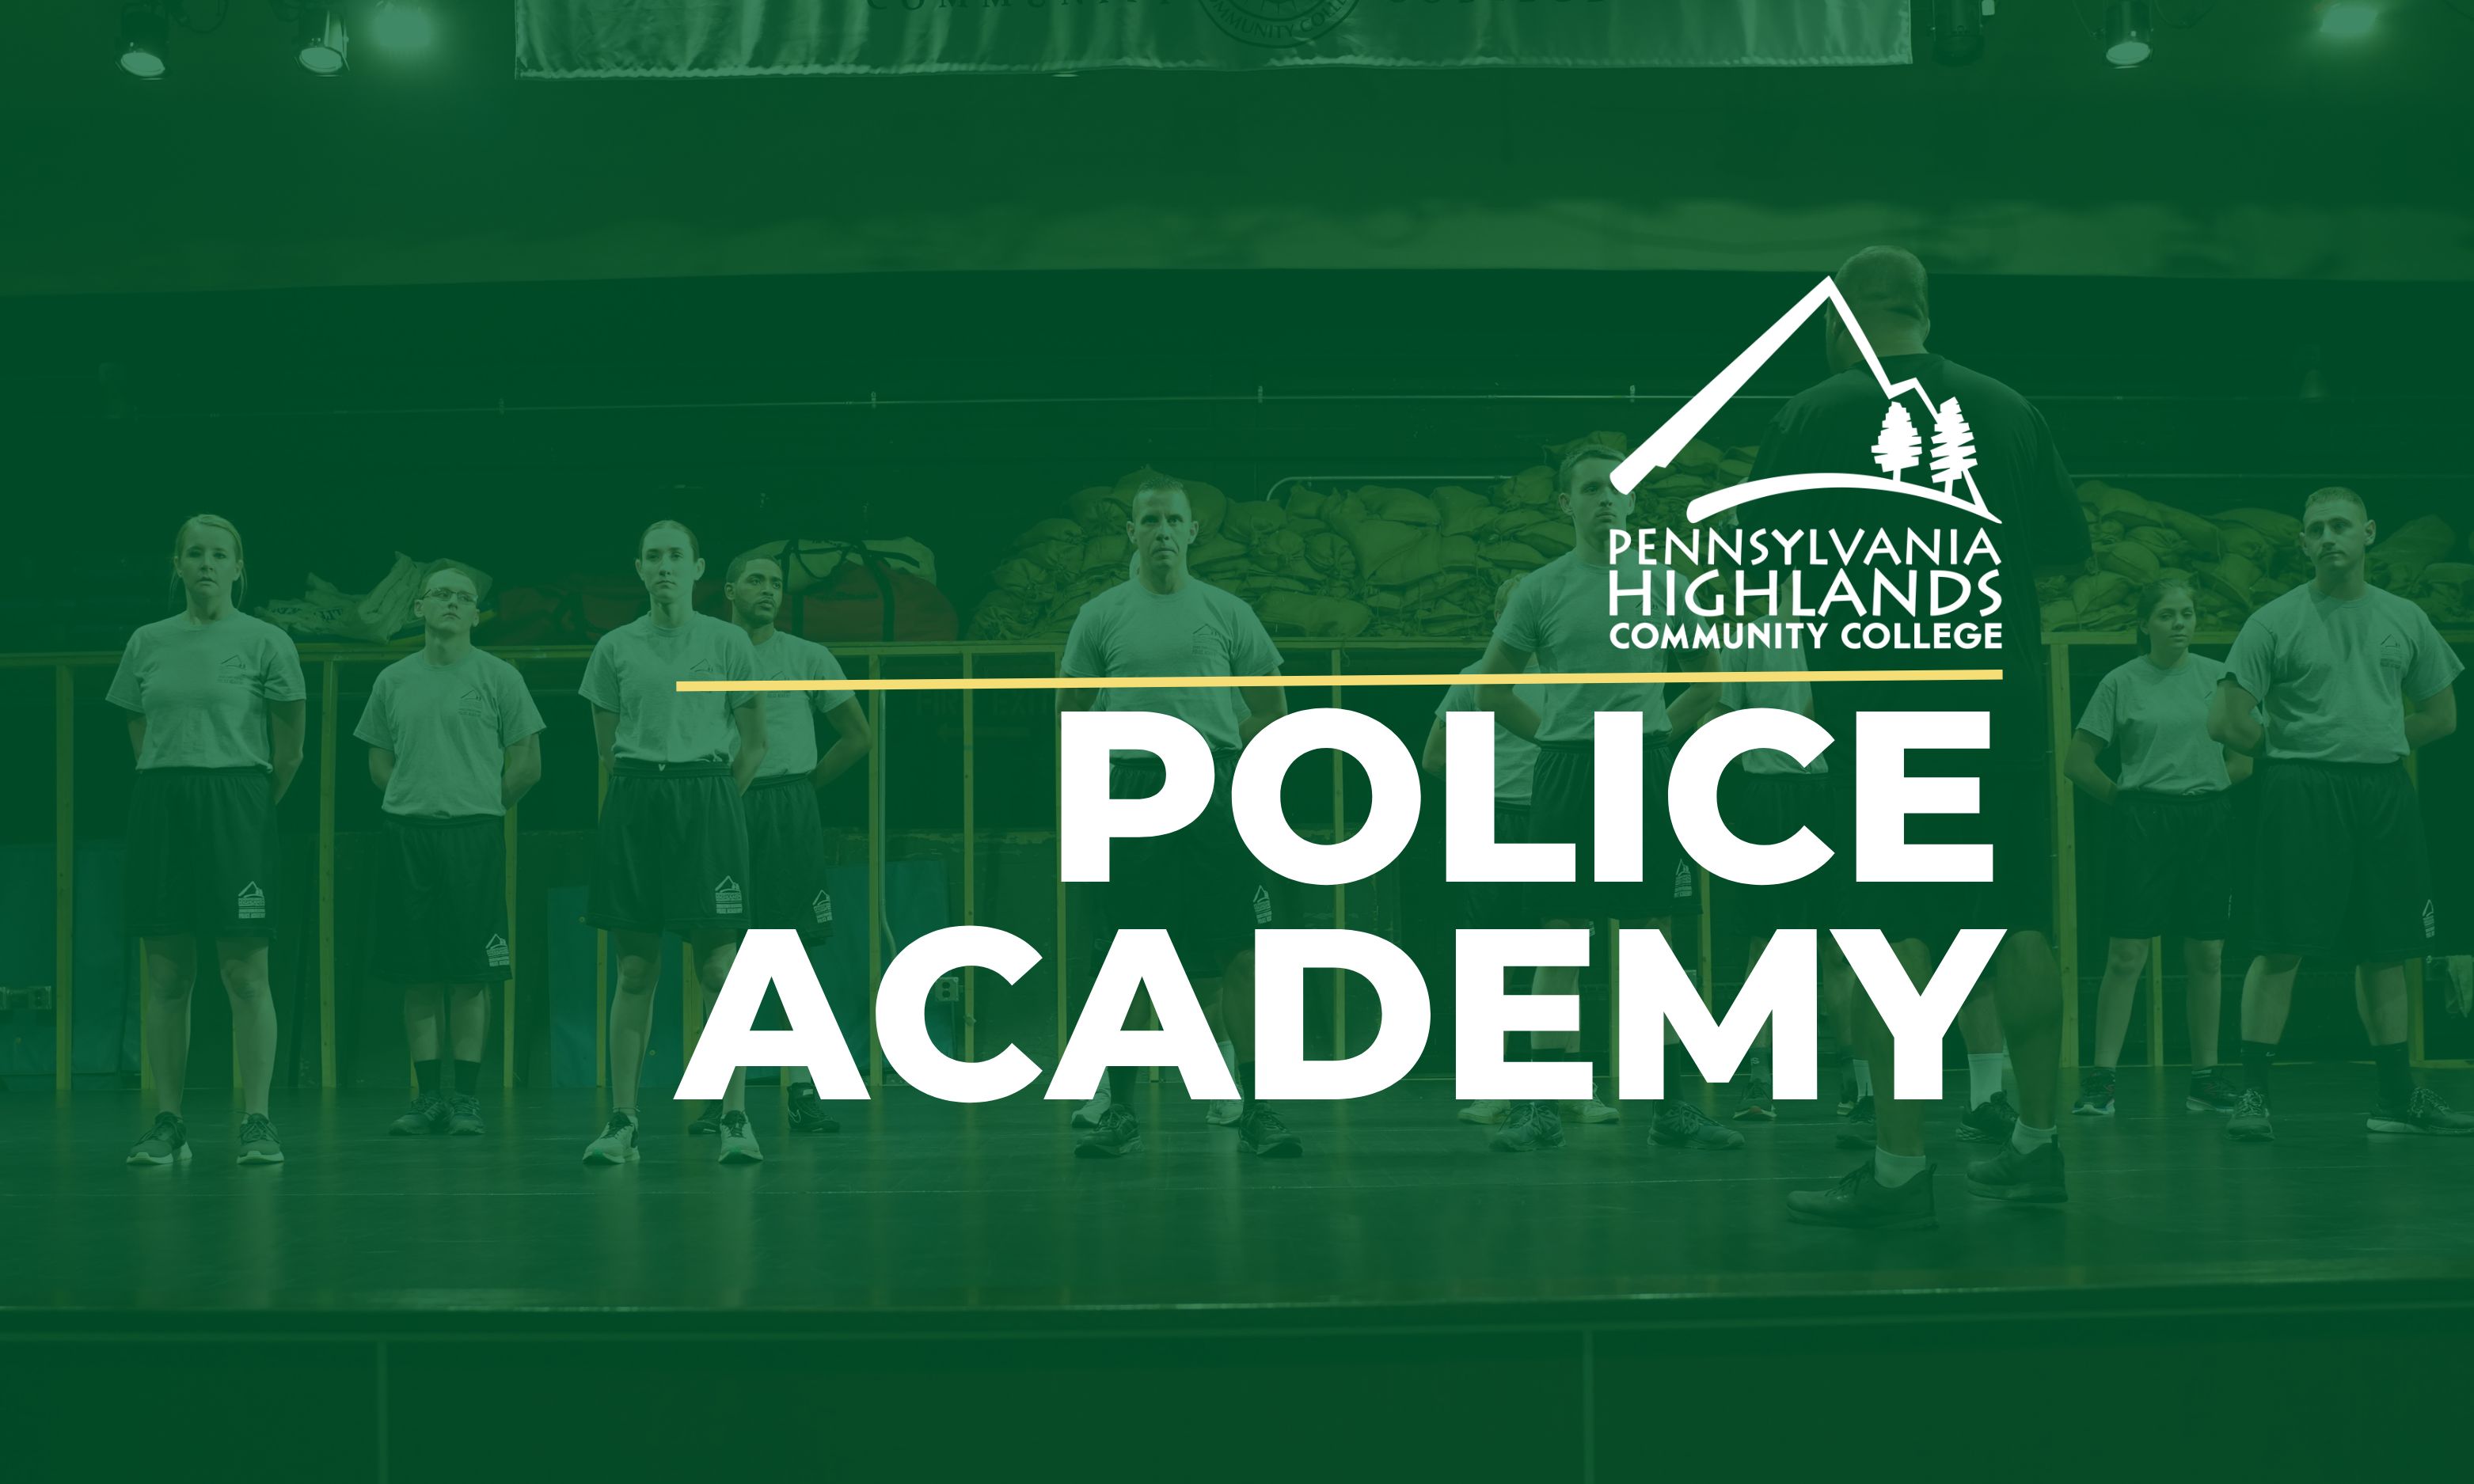 Police Academy To Hold Two Open Houses